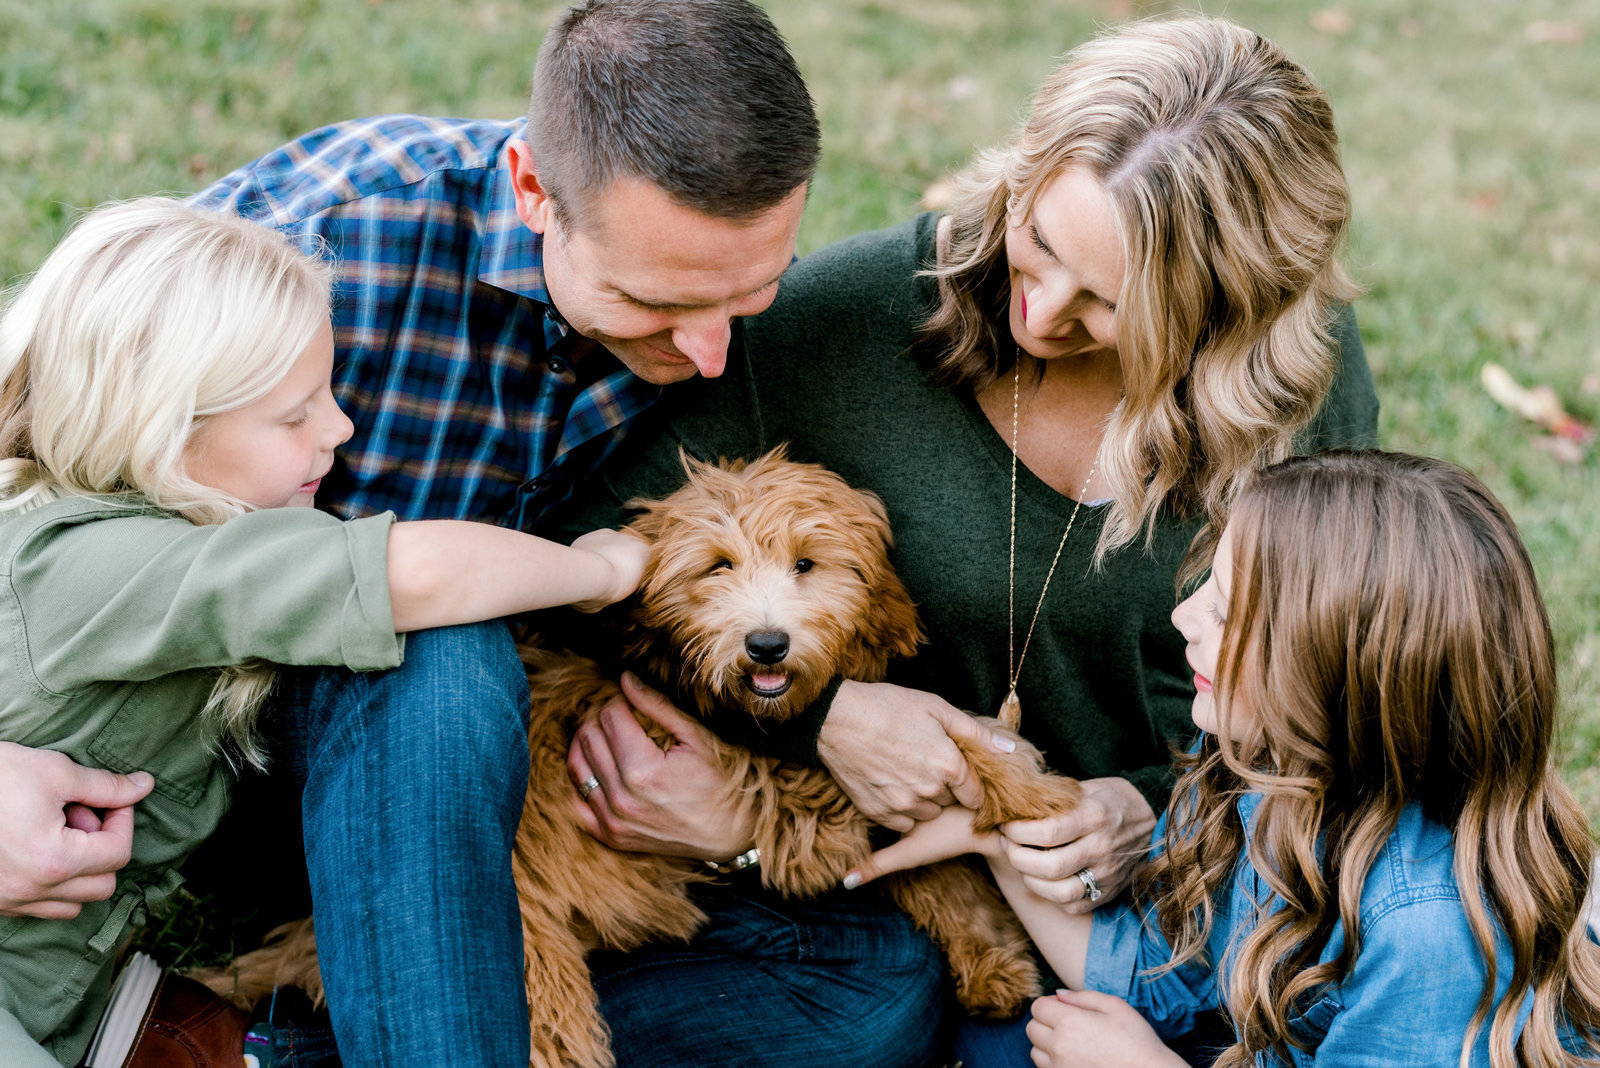 Family photos with puppy.